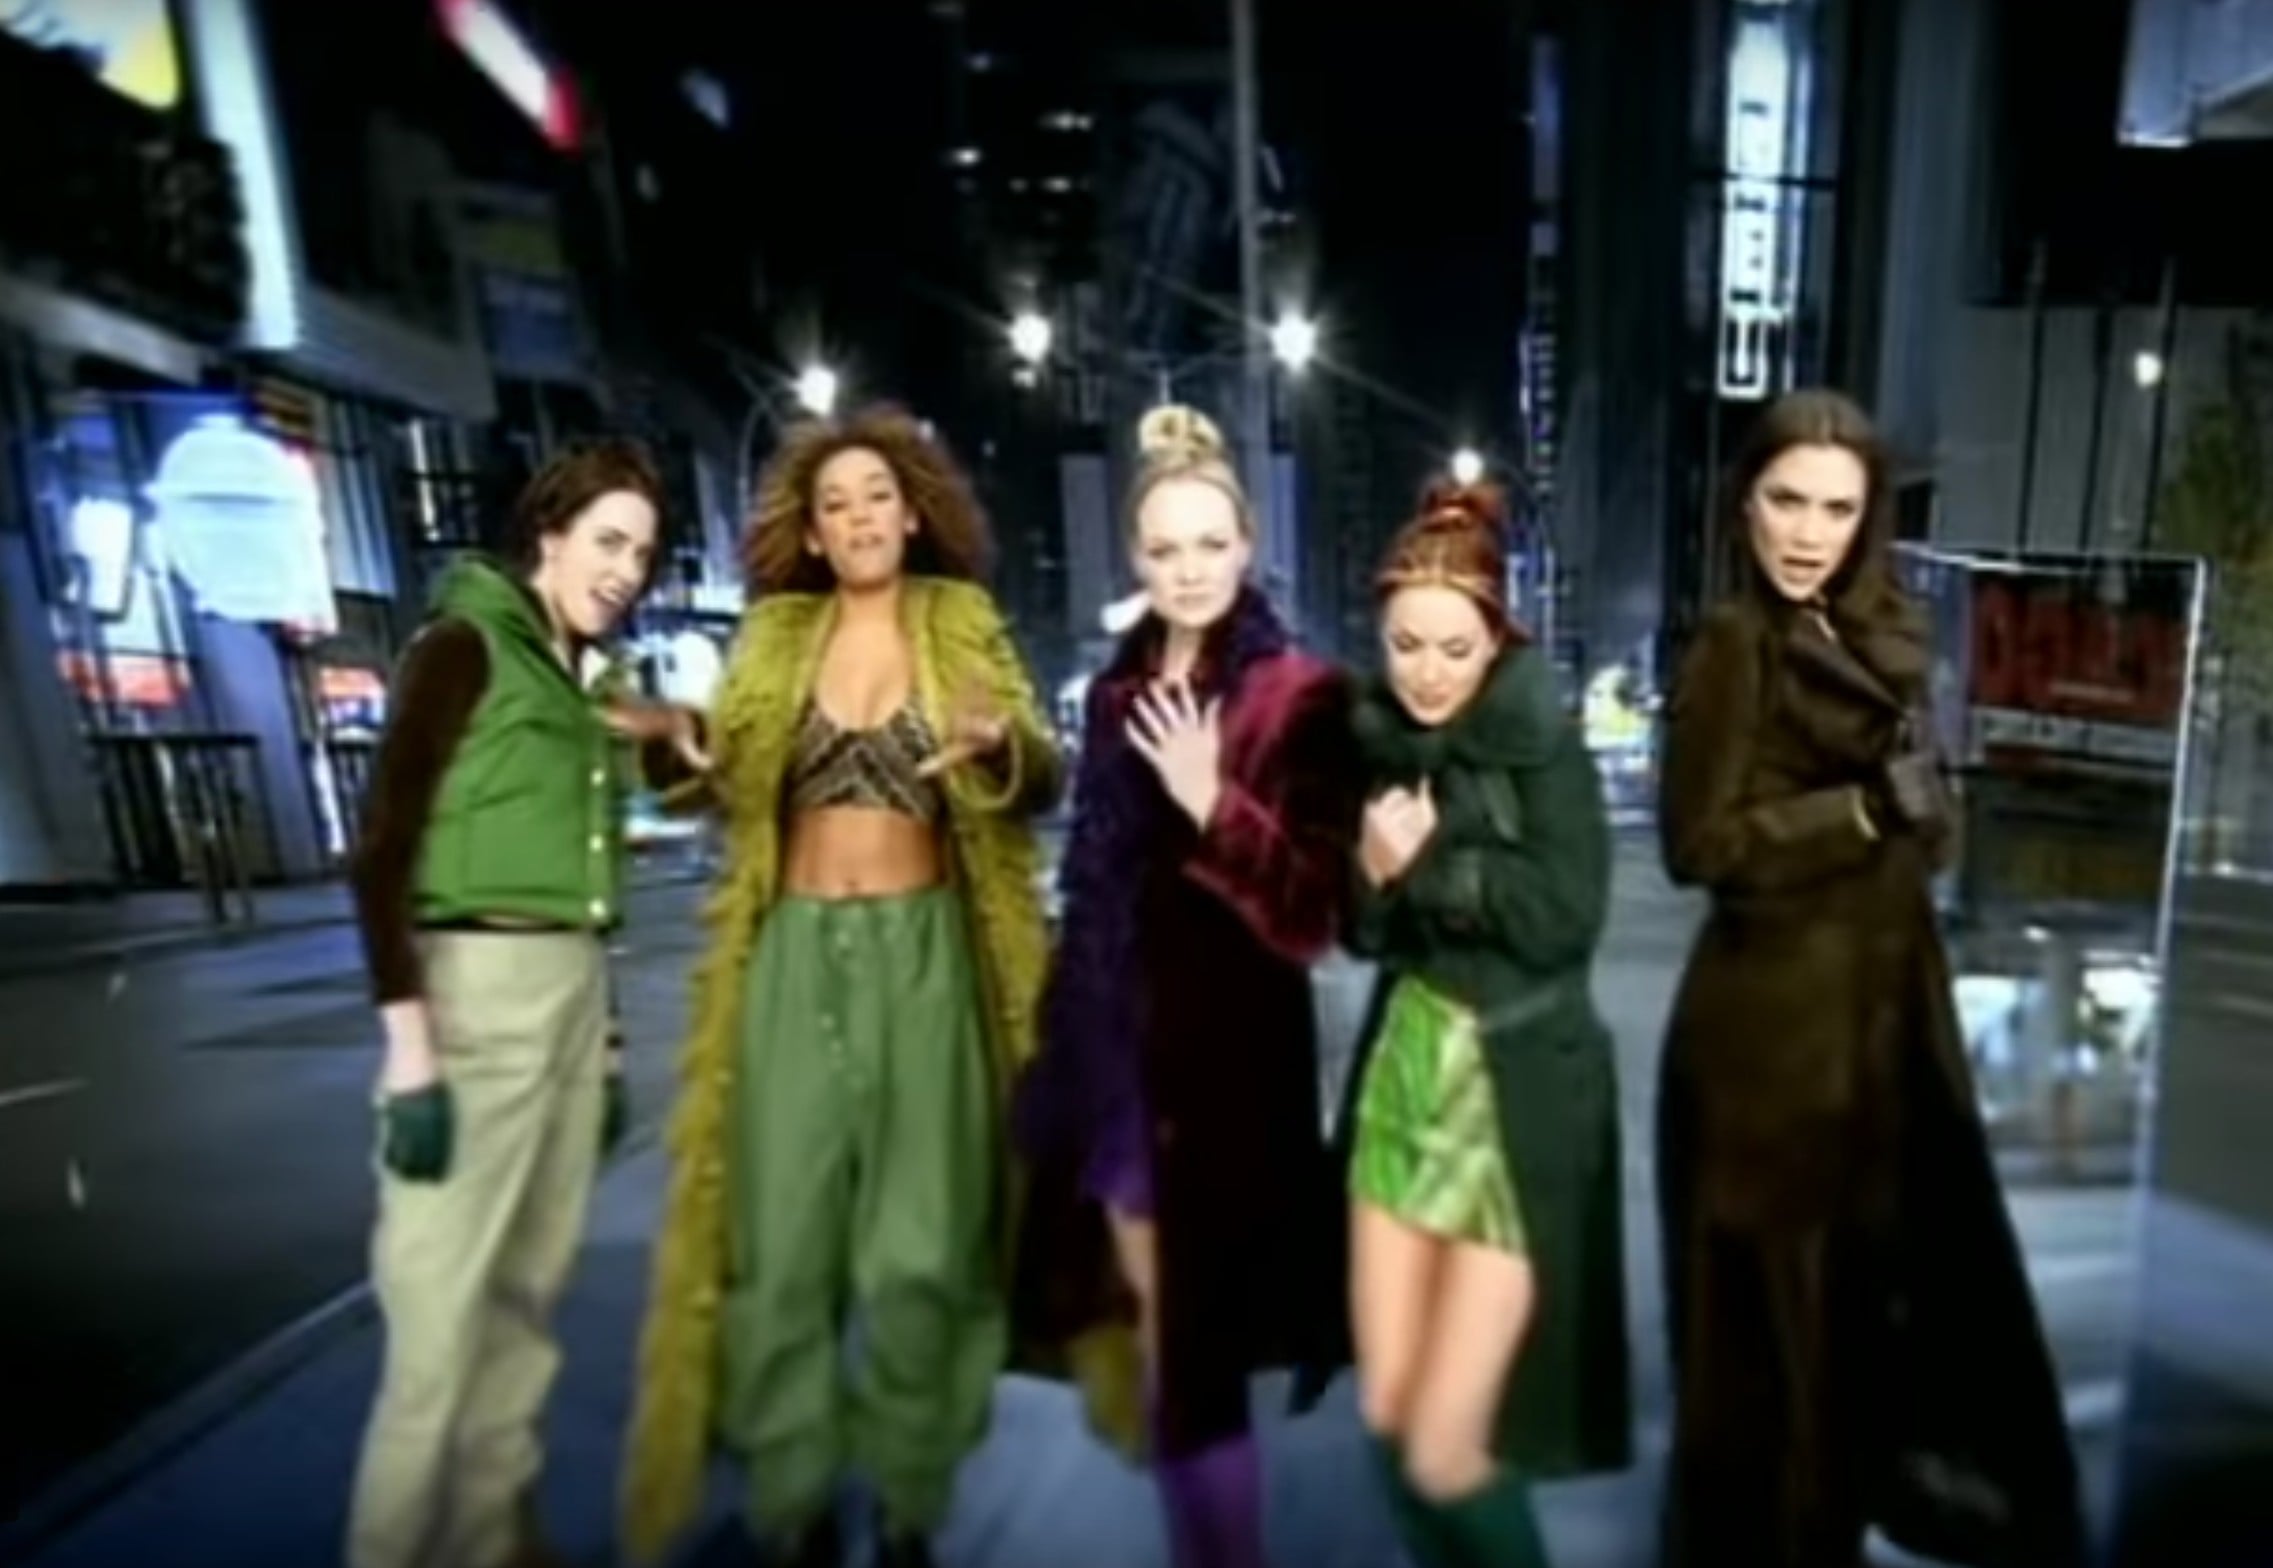 Watch 8 Times the Spice Girls Influenced '90s Fashion and Pop Culture